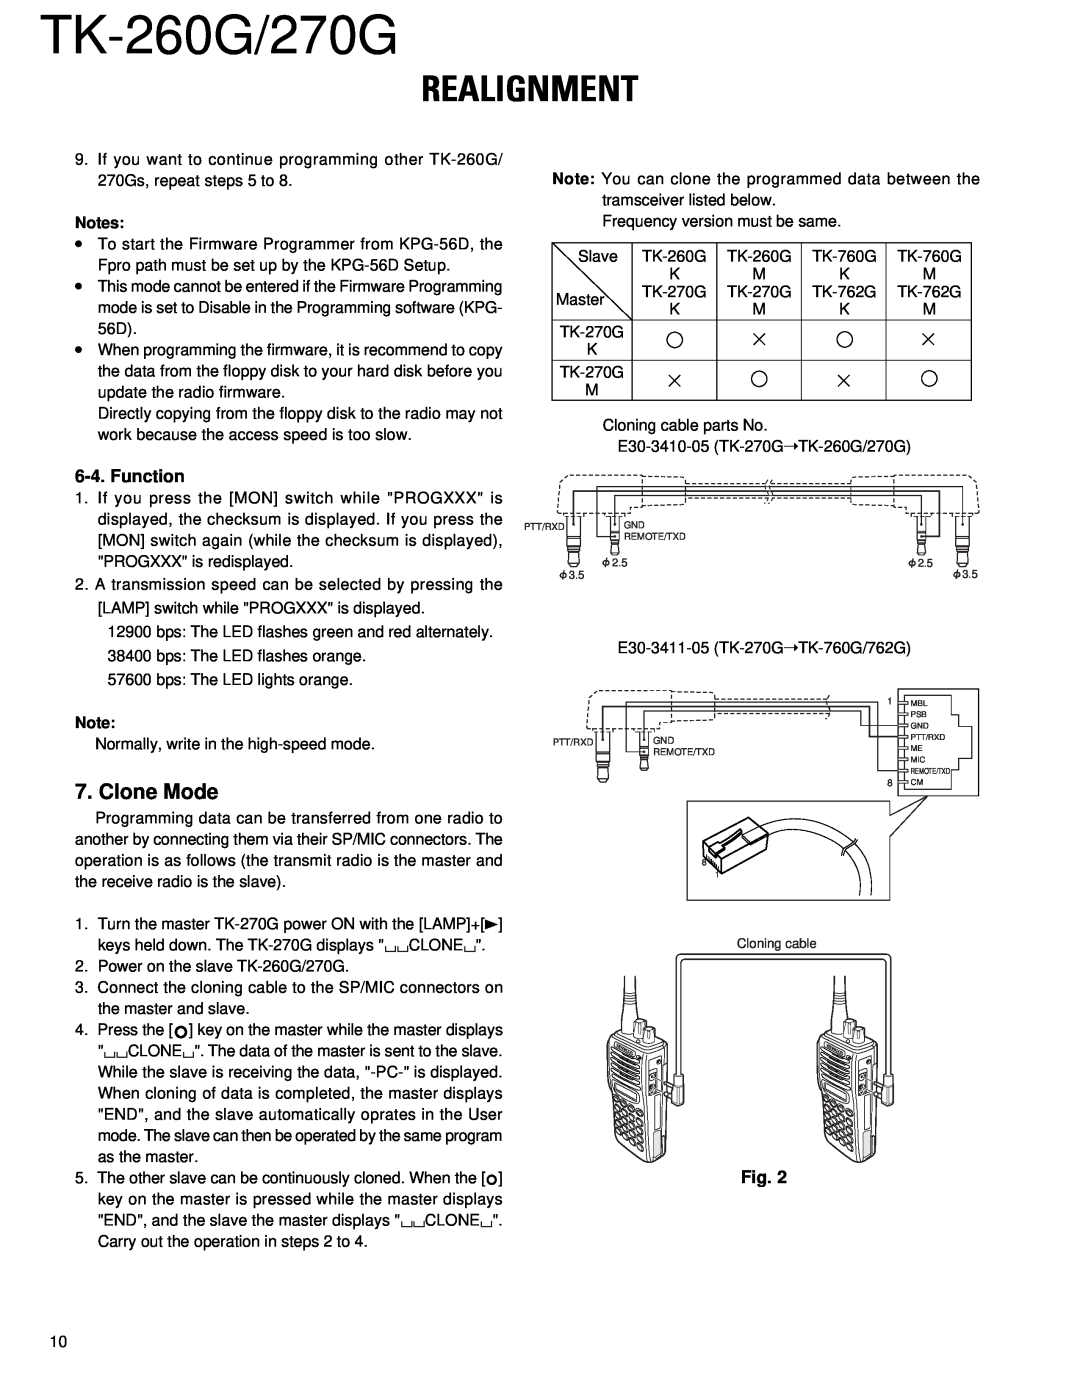 Kenwood TK-270G service manual Clone Mode, Function, TK-260G/270G, Realignment, Fig 